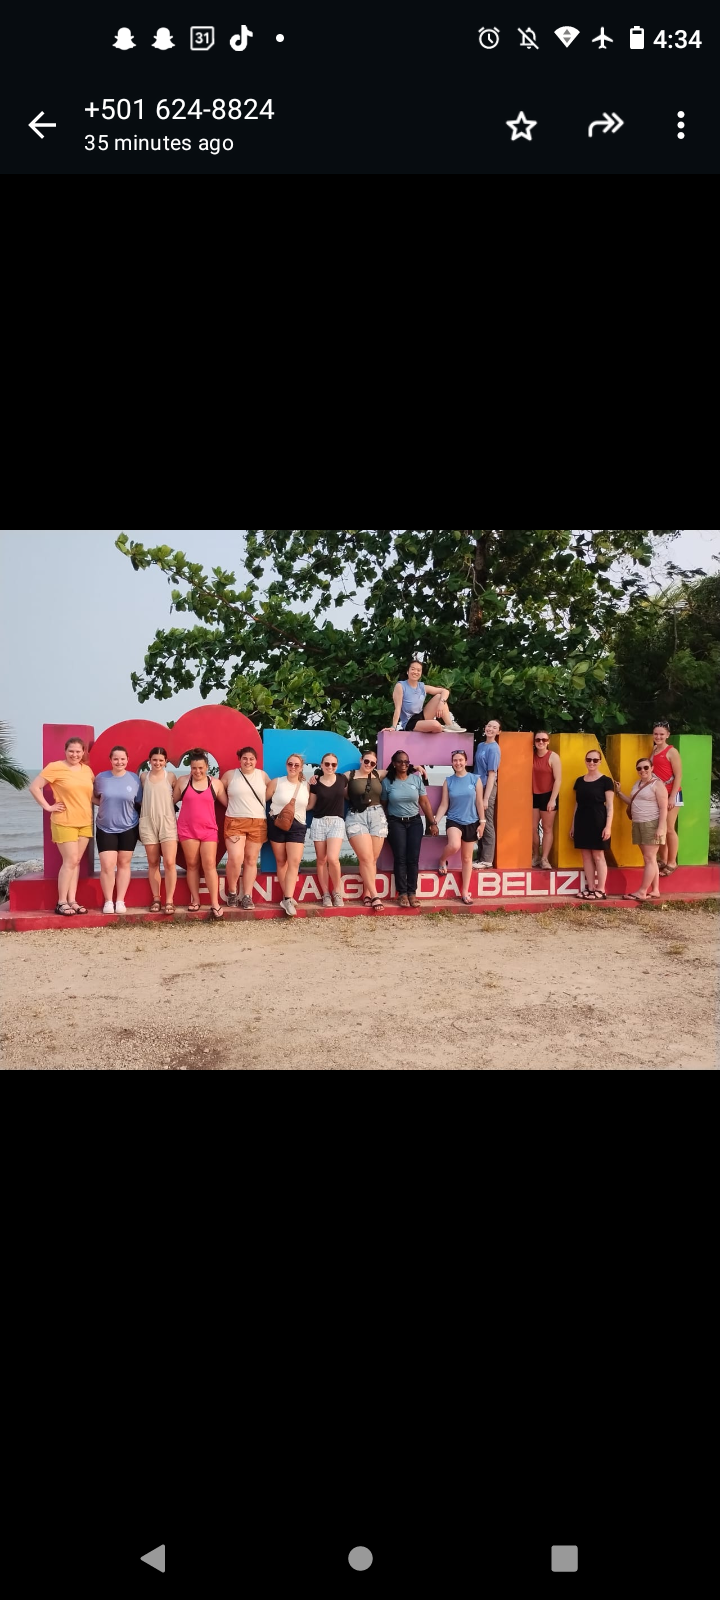 The group in front of the town sign.